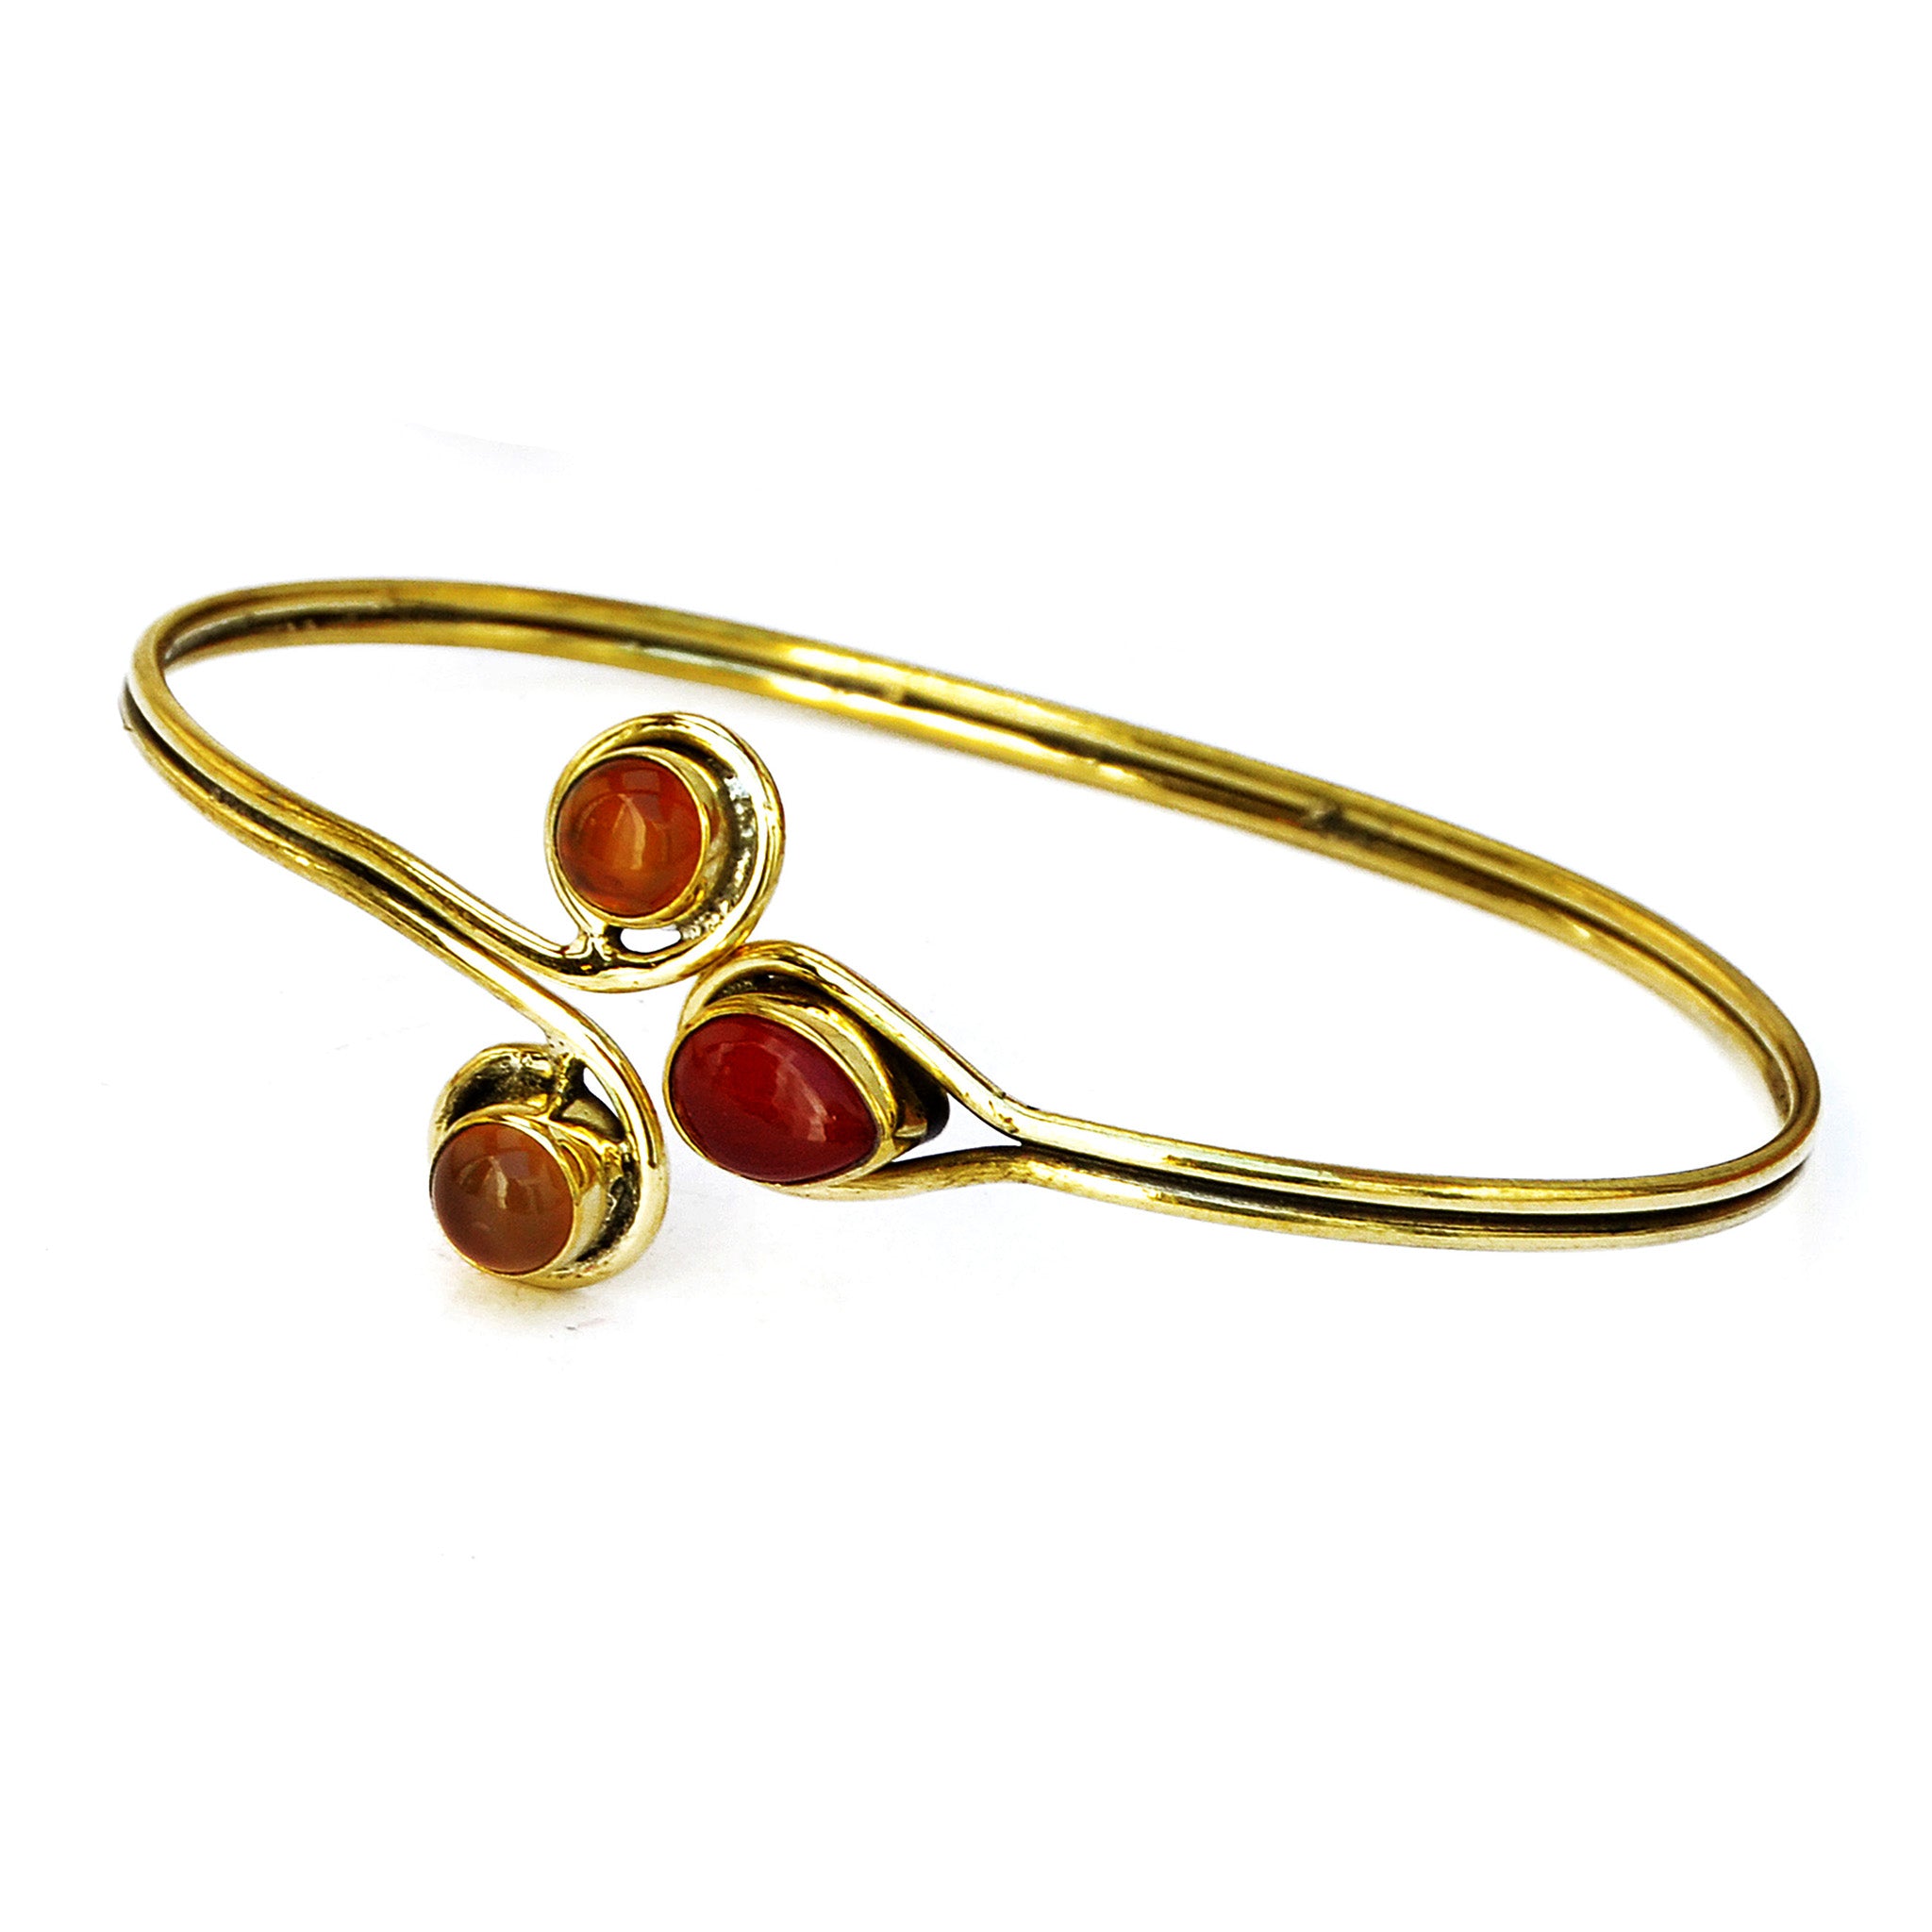 Indian gold bracelet with red and orange stones